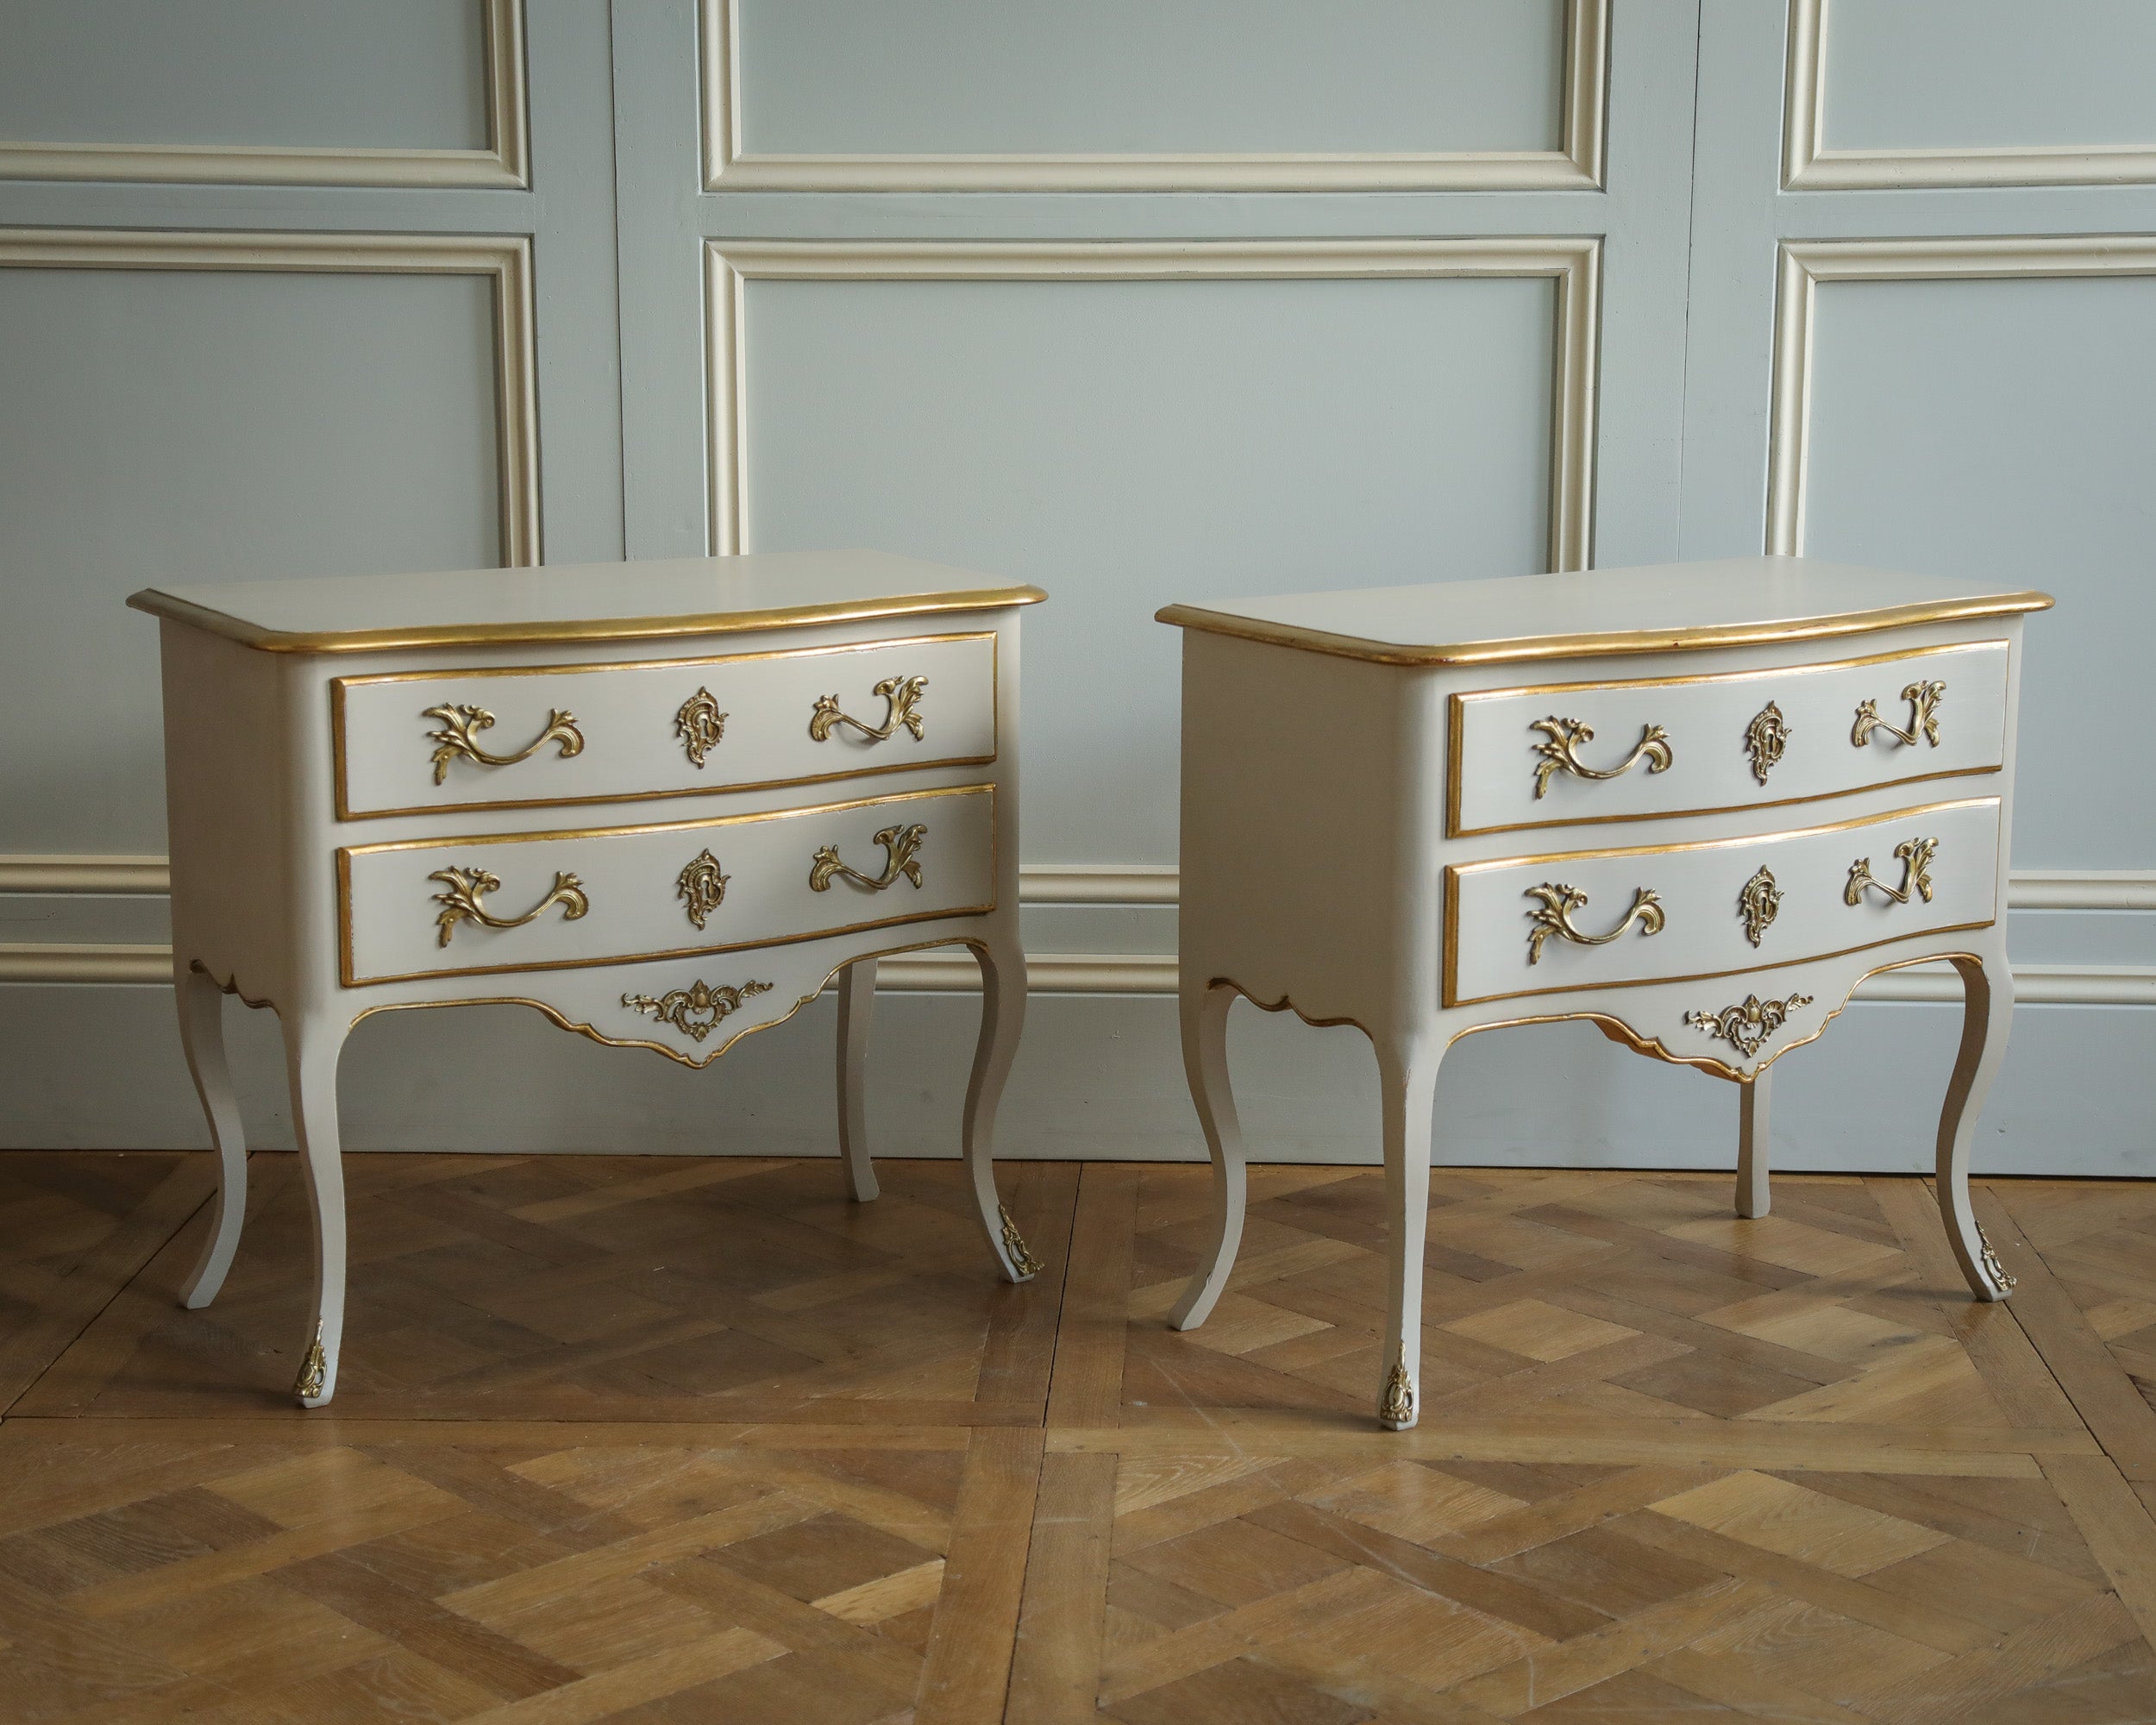 A pair of hand-carved French, Louis XV, style bedside tables/small chest of drawers with a handsome bombe style curved shape. The pieces are hand-finished in a French Blue/Grey with gilded highlights and fitted with antiqued bronze ormolu. Pair in